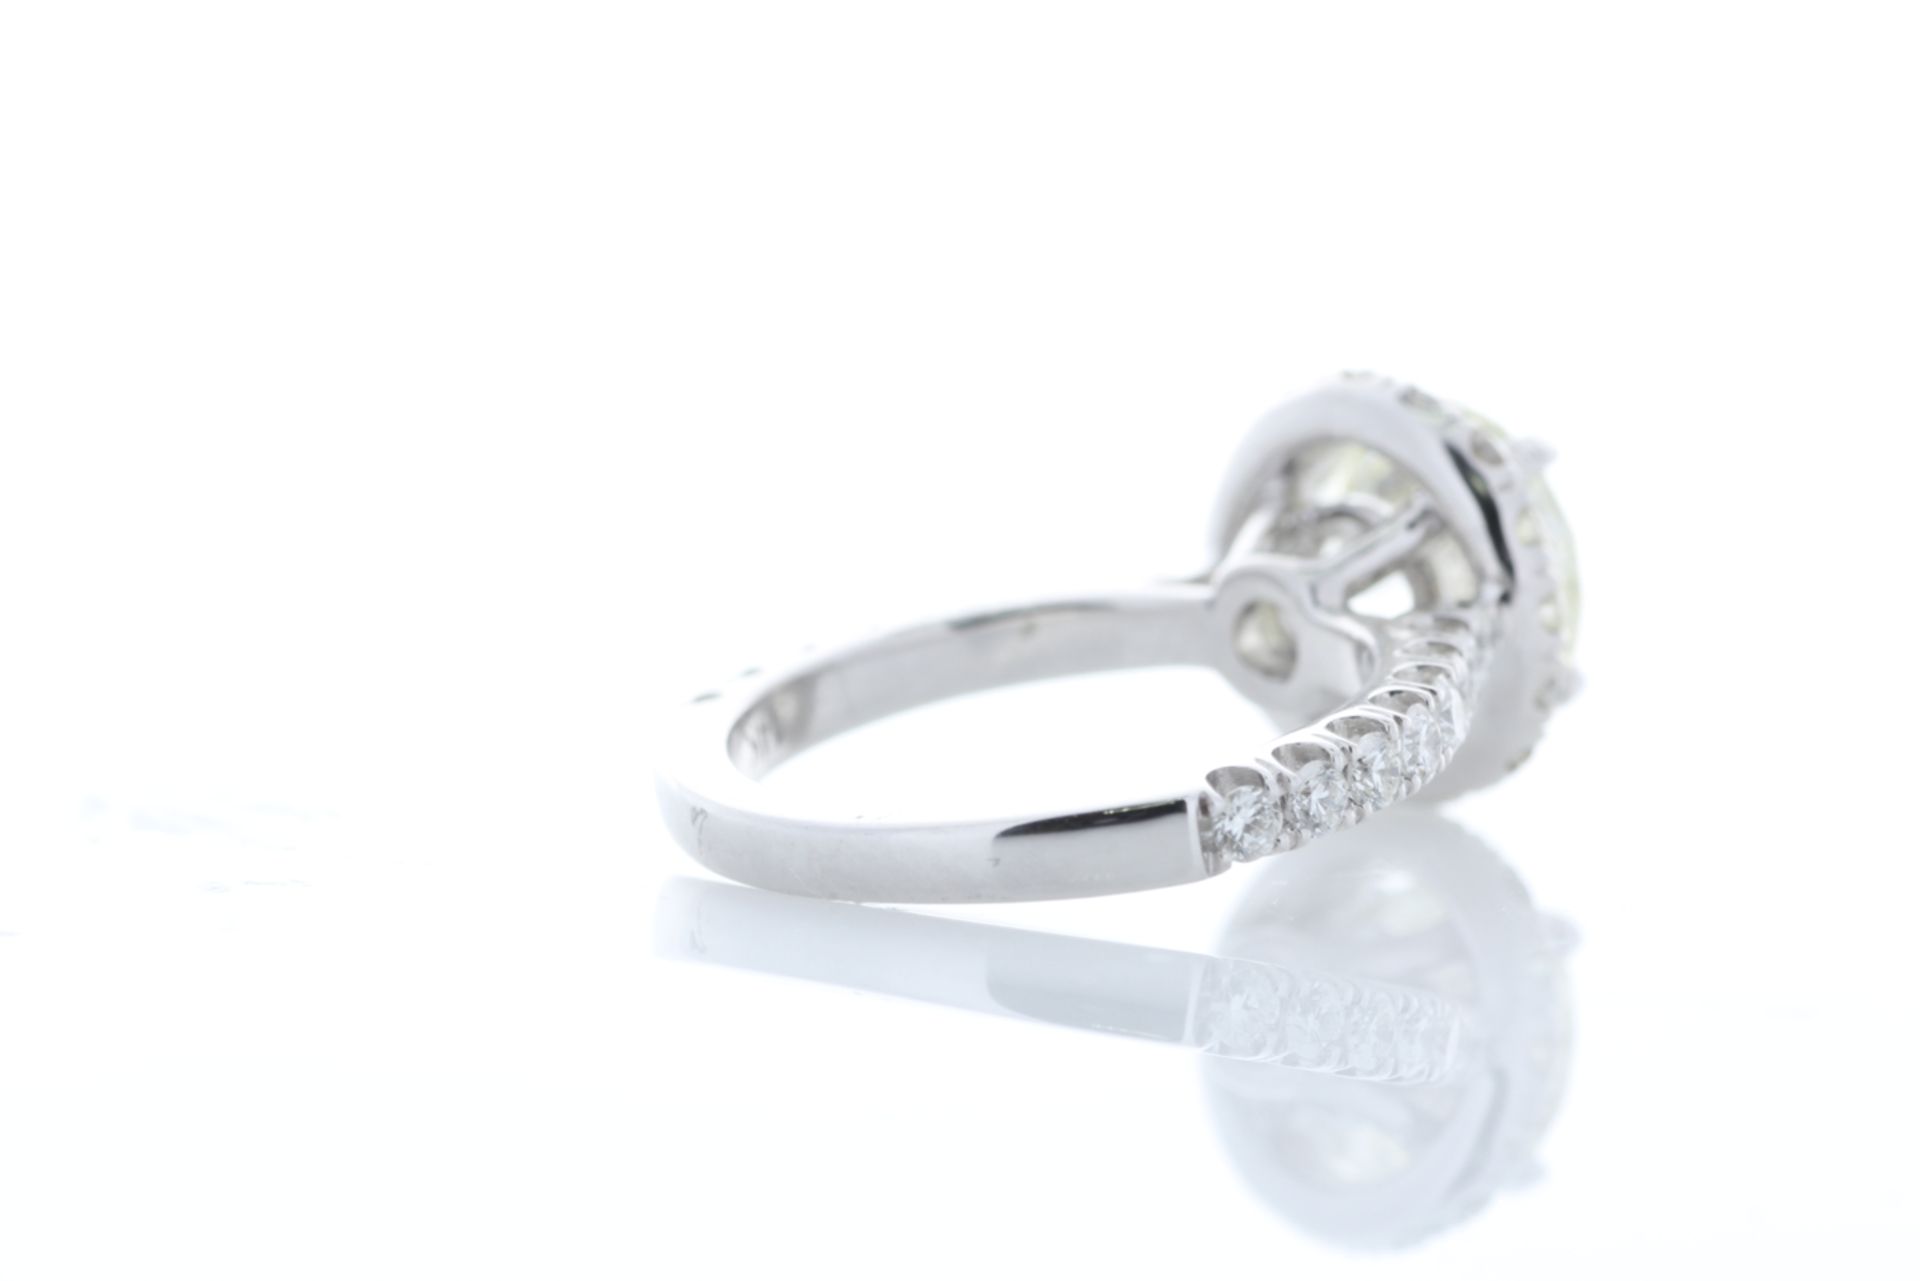 18ct White Gold Single Stone With Halo Setting Ring 2.85 Centre Stone - Image 5 of 9